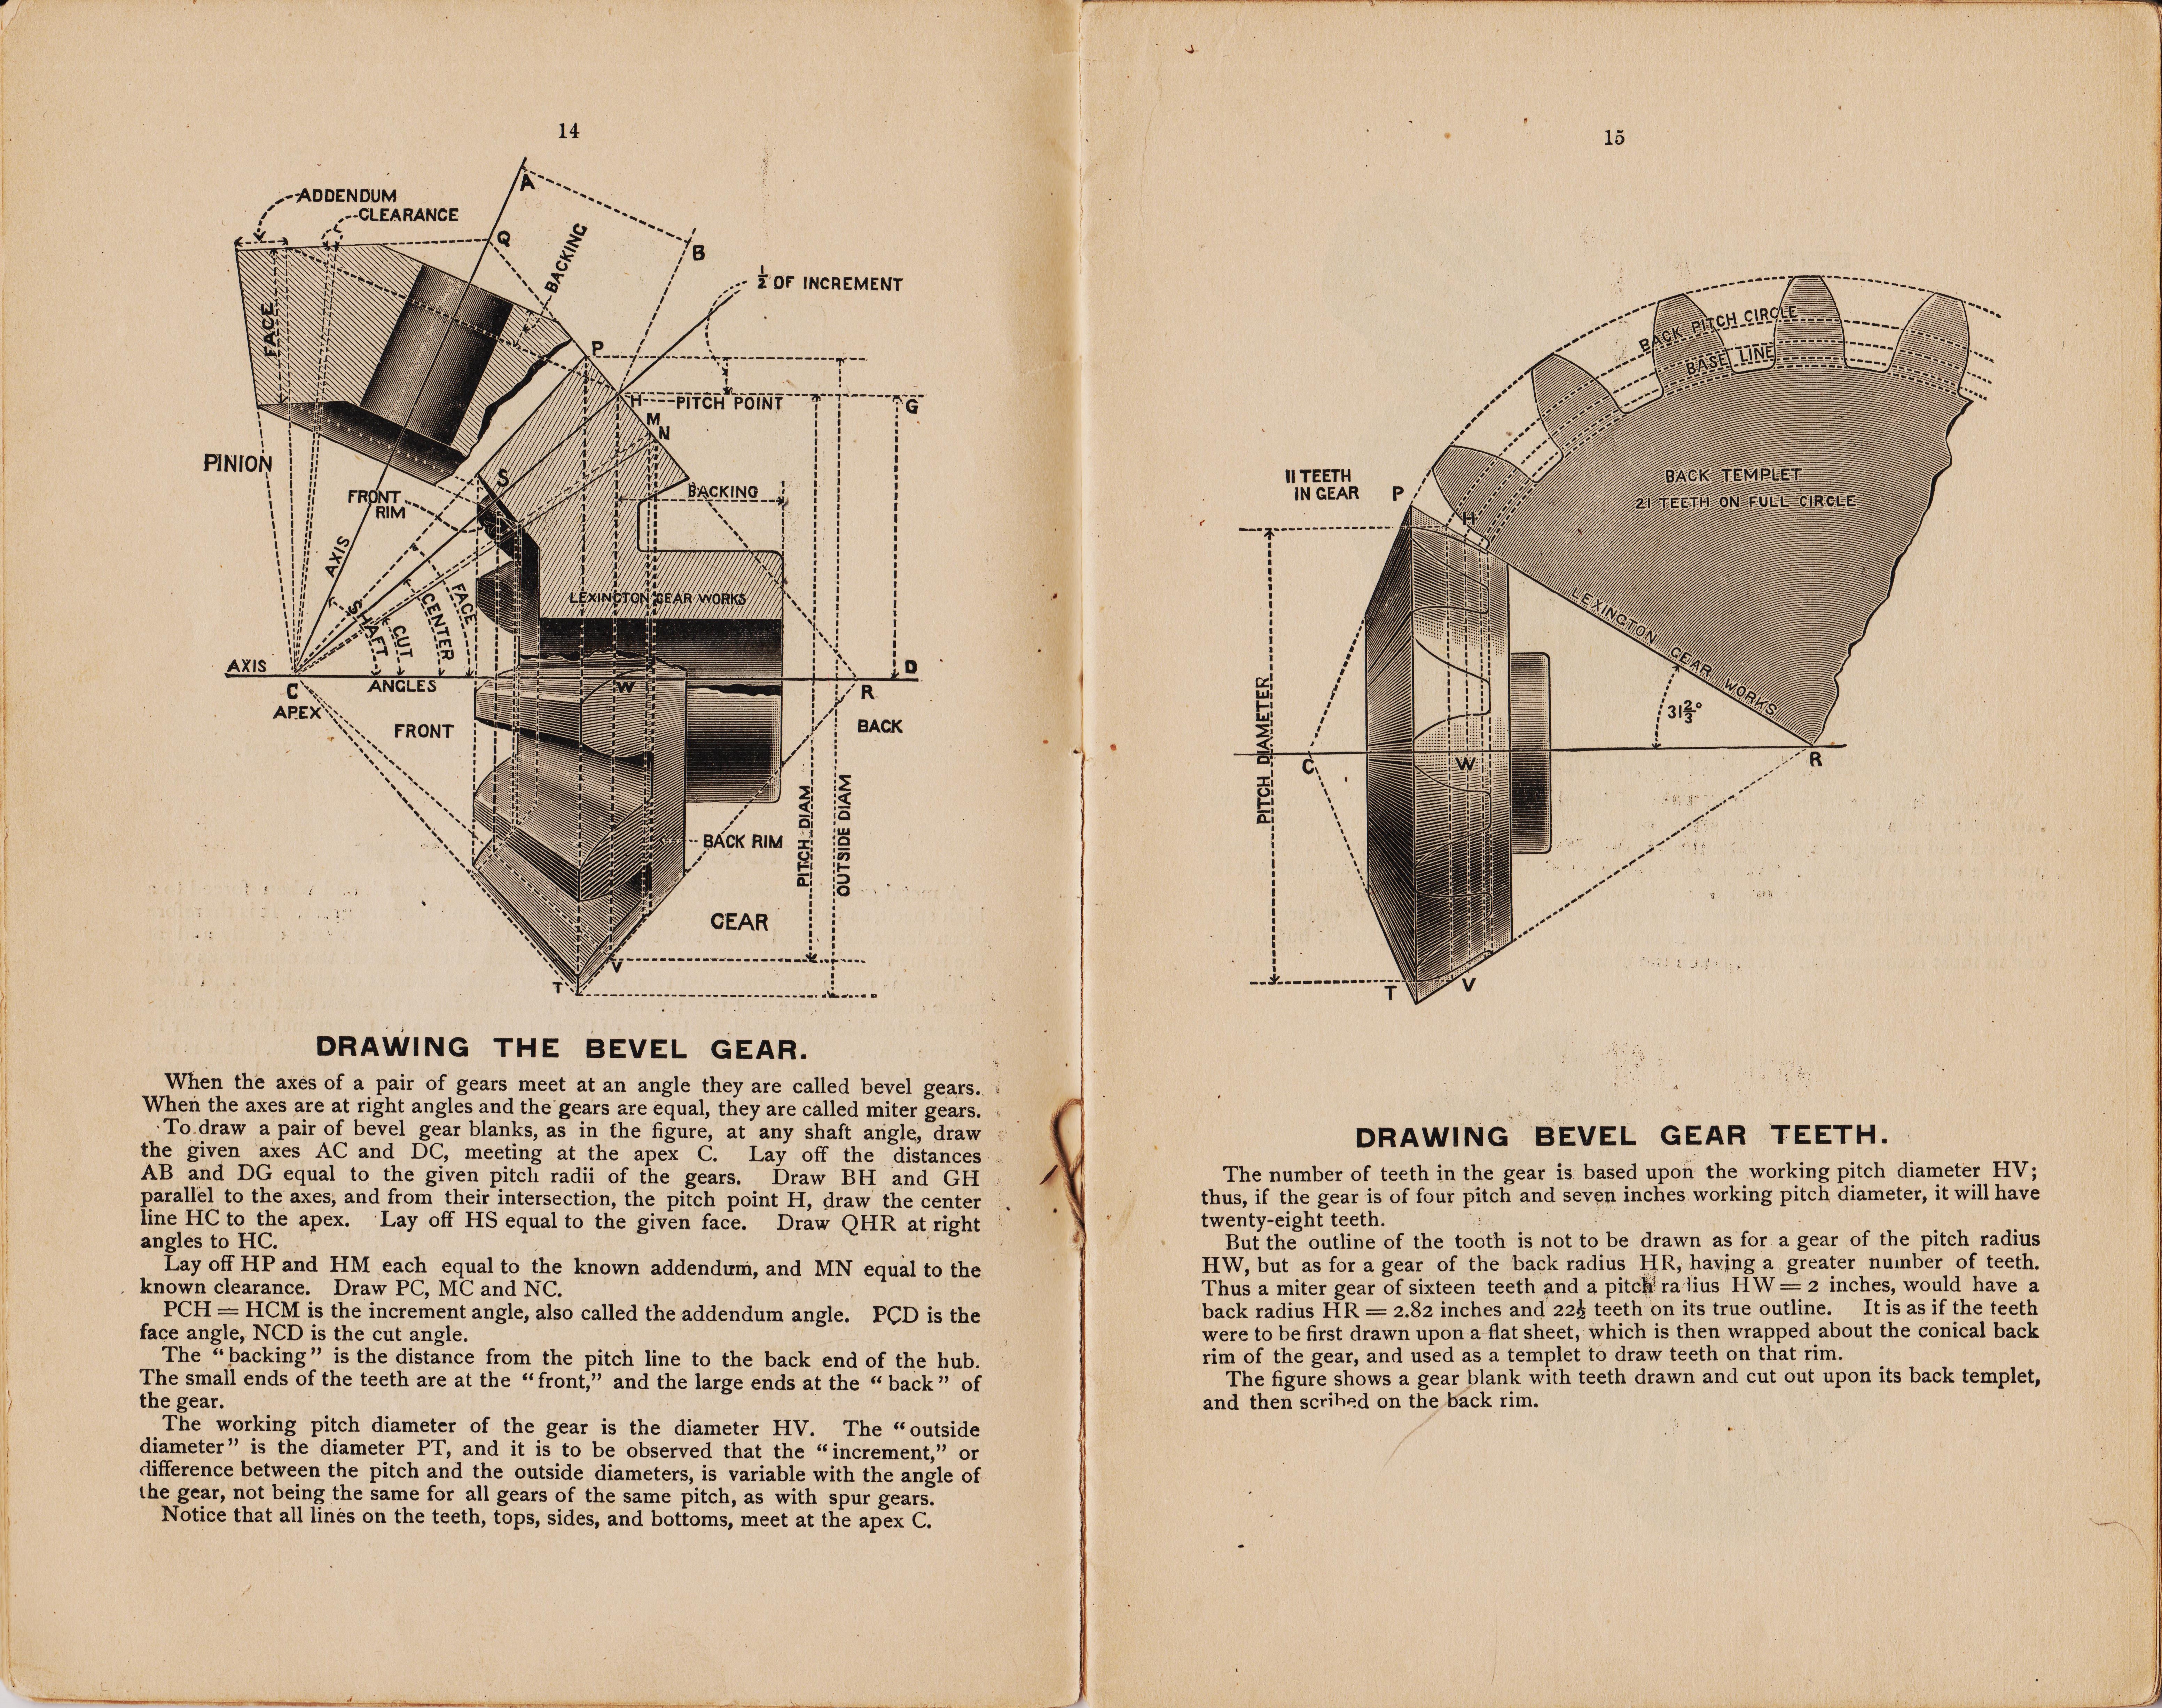 http://antiquemachinery.com/images-2020/Grants-Gear-Book-Lexington-Gear-Works-1892-page-14-15.jpg